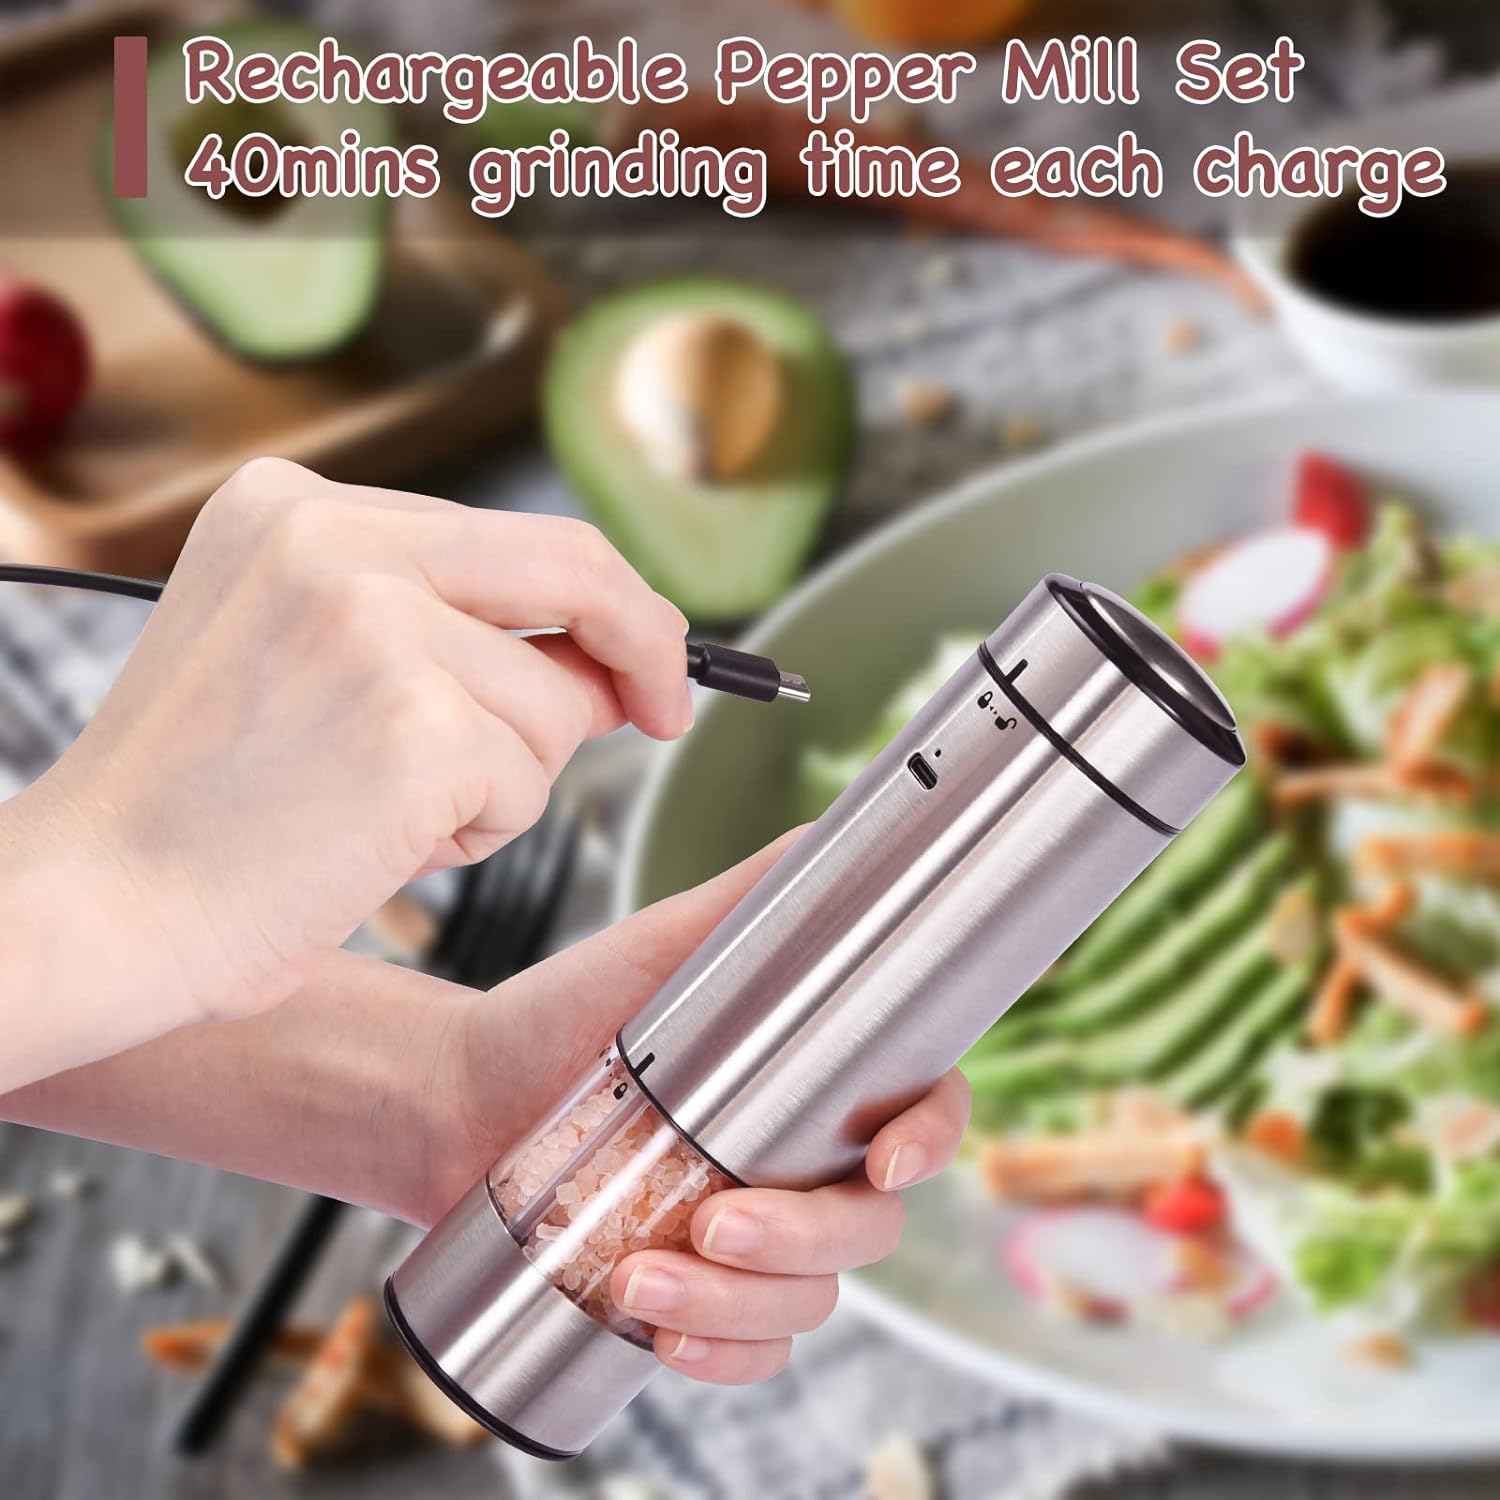 Tovendor Salt and Pepper Grinder Set, Stainless Steel Brushed Pepper Mill with Bright Light, Adjustable Coarseness, Rechargeable Battery Powered (One Handed Operation, Set of 2)